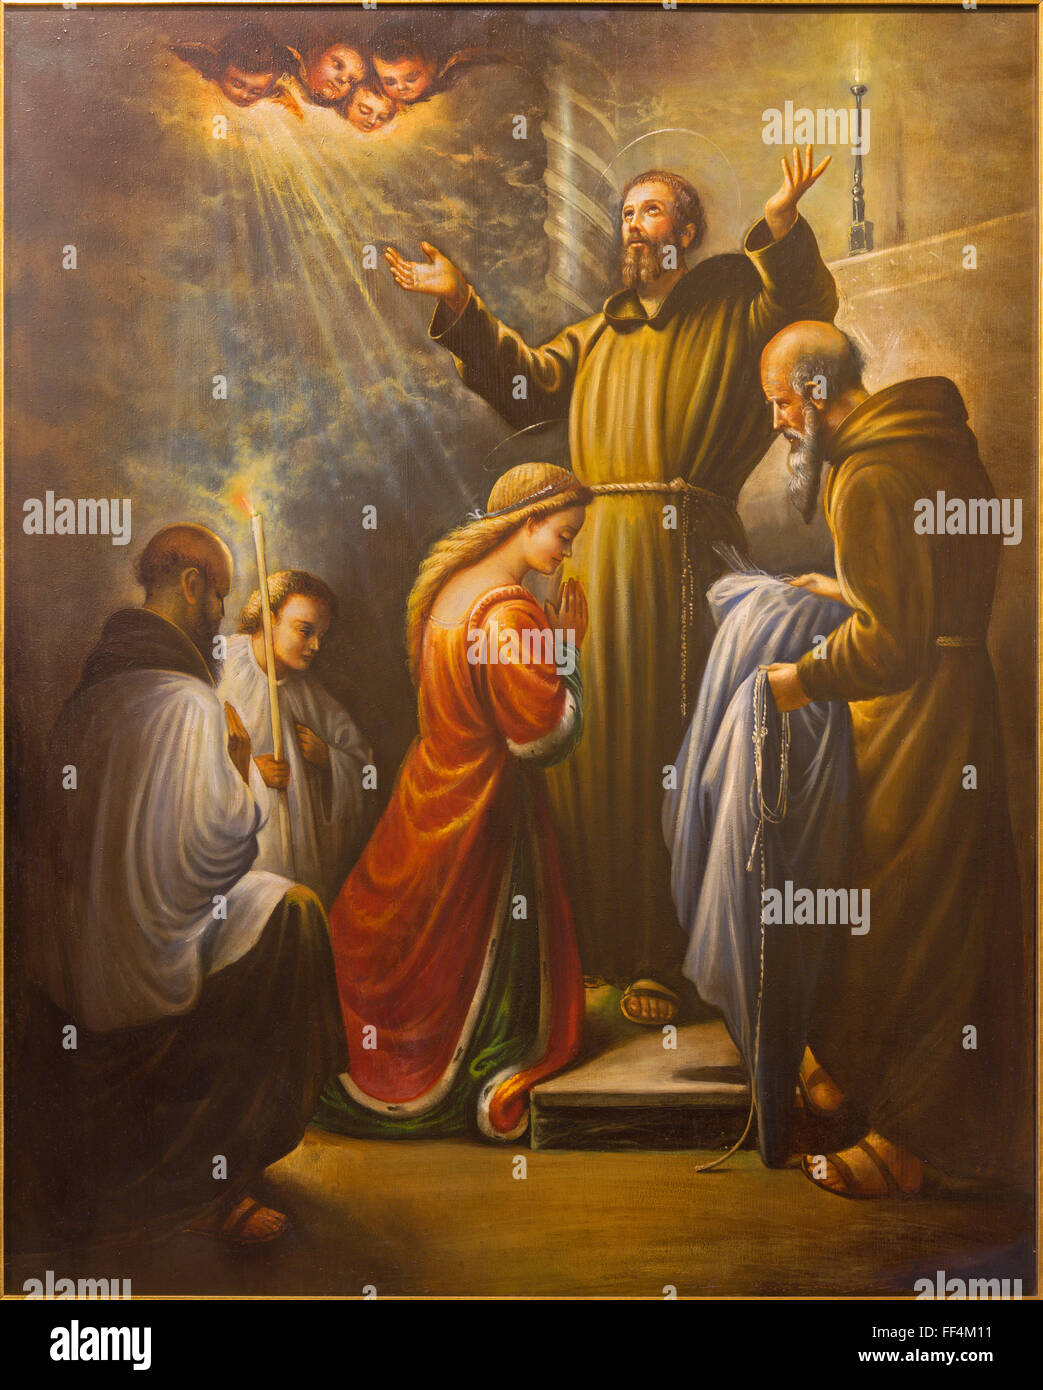 CORDOBA, SPAIN - MAY 27, 2015: St. Francis of Assisi at the ordination of st. Clara, by unknown artist, 20. century Stock Photo